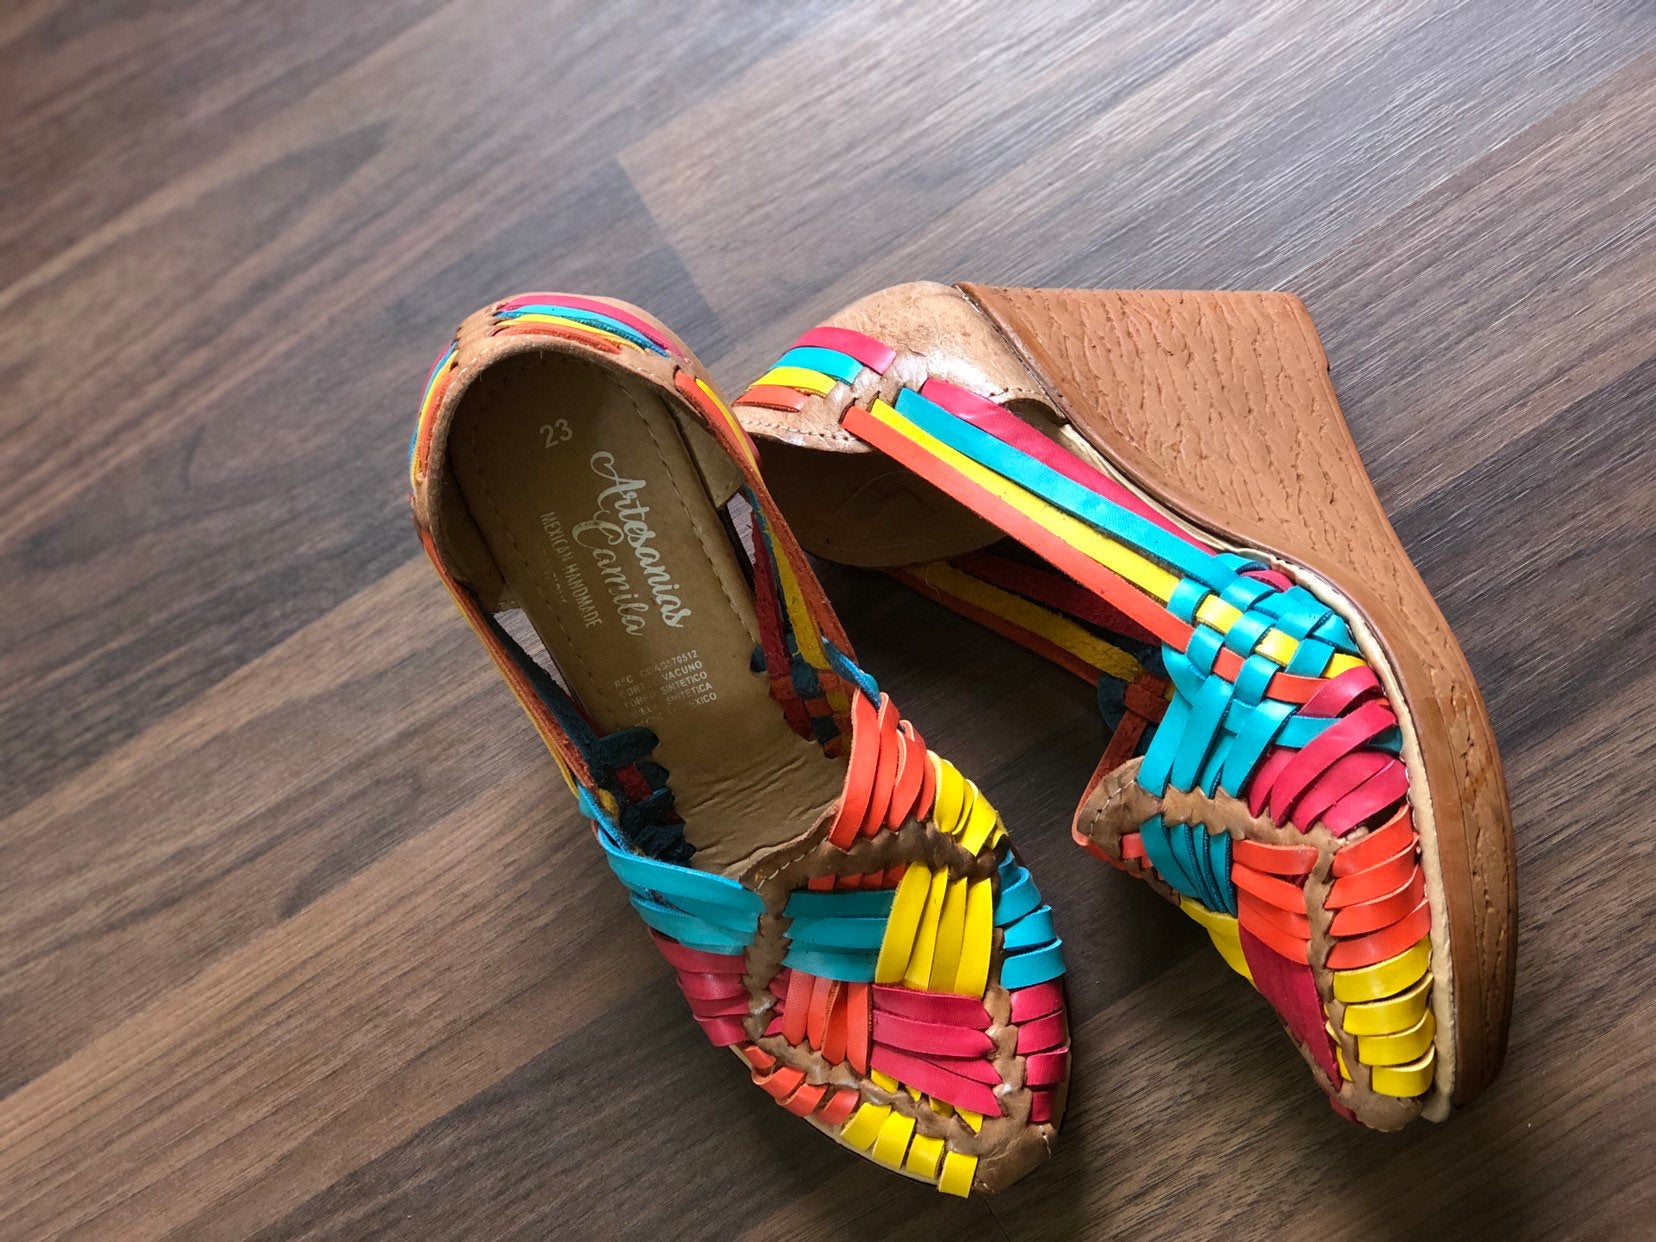 Mexican Leather Wedge Heels. All Sizes Boho-hippie Vintage. Mexican  Artisanal Shoes. Mexican Leather Heels. Leather Heels With Buckle. -   Hong Kong